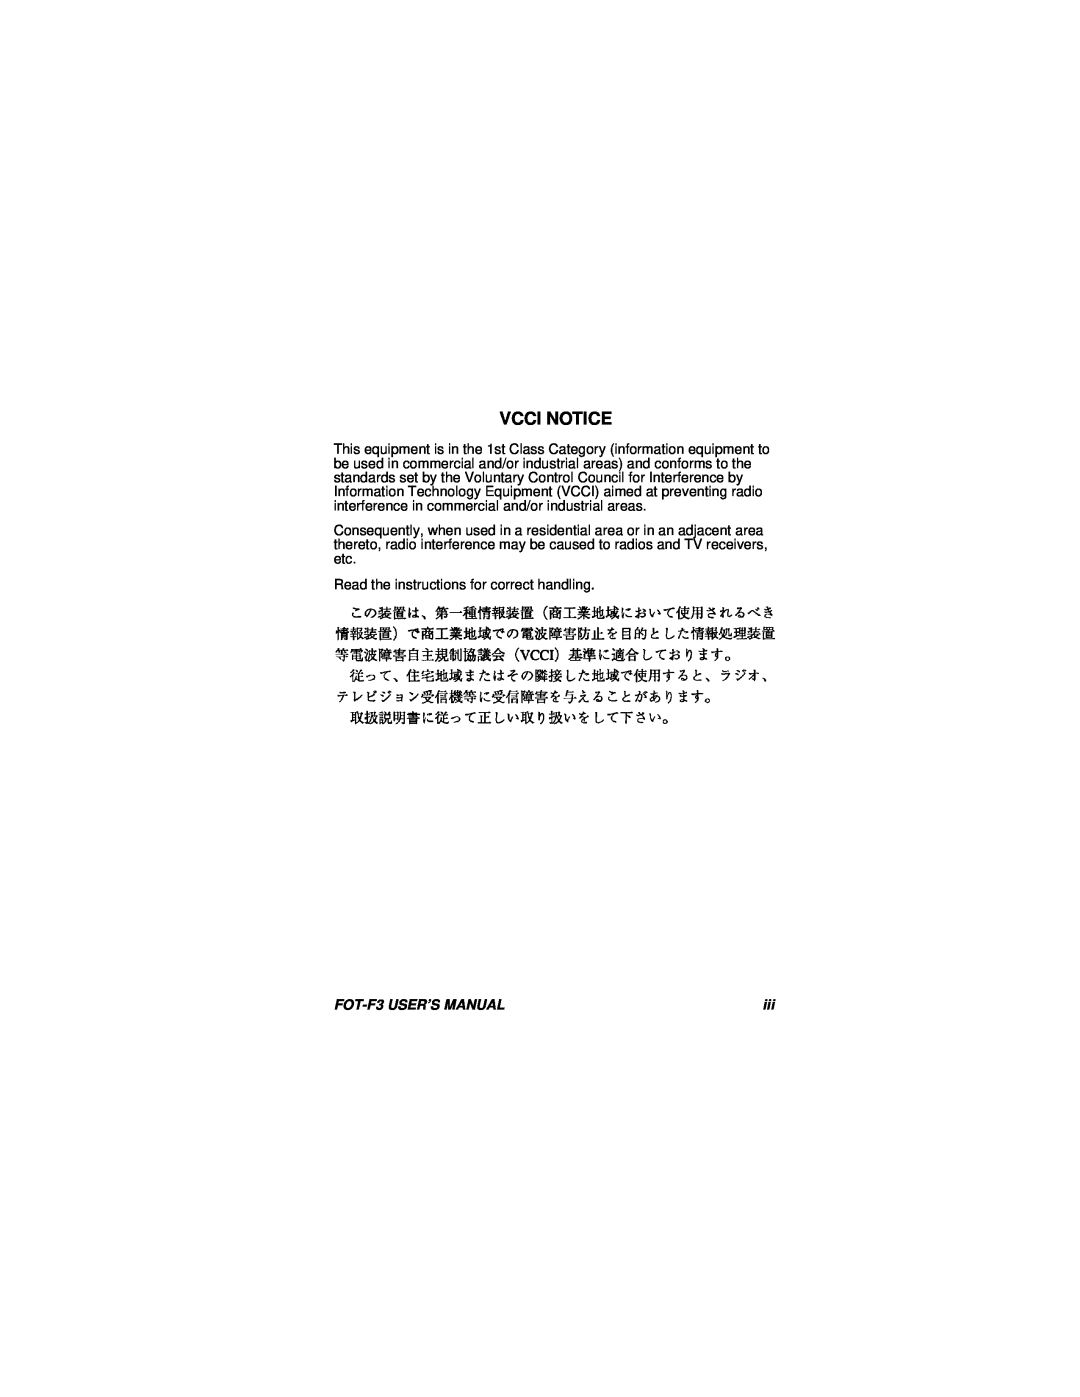 Cabletron Systems user manual Vcci Notice, FOT-F3 USER’S MANUAL 